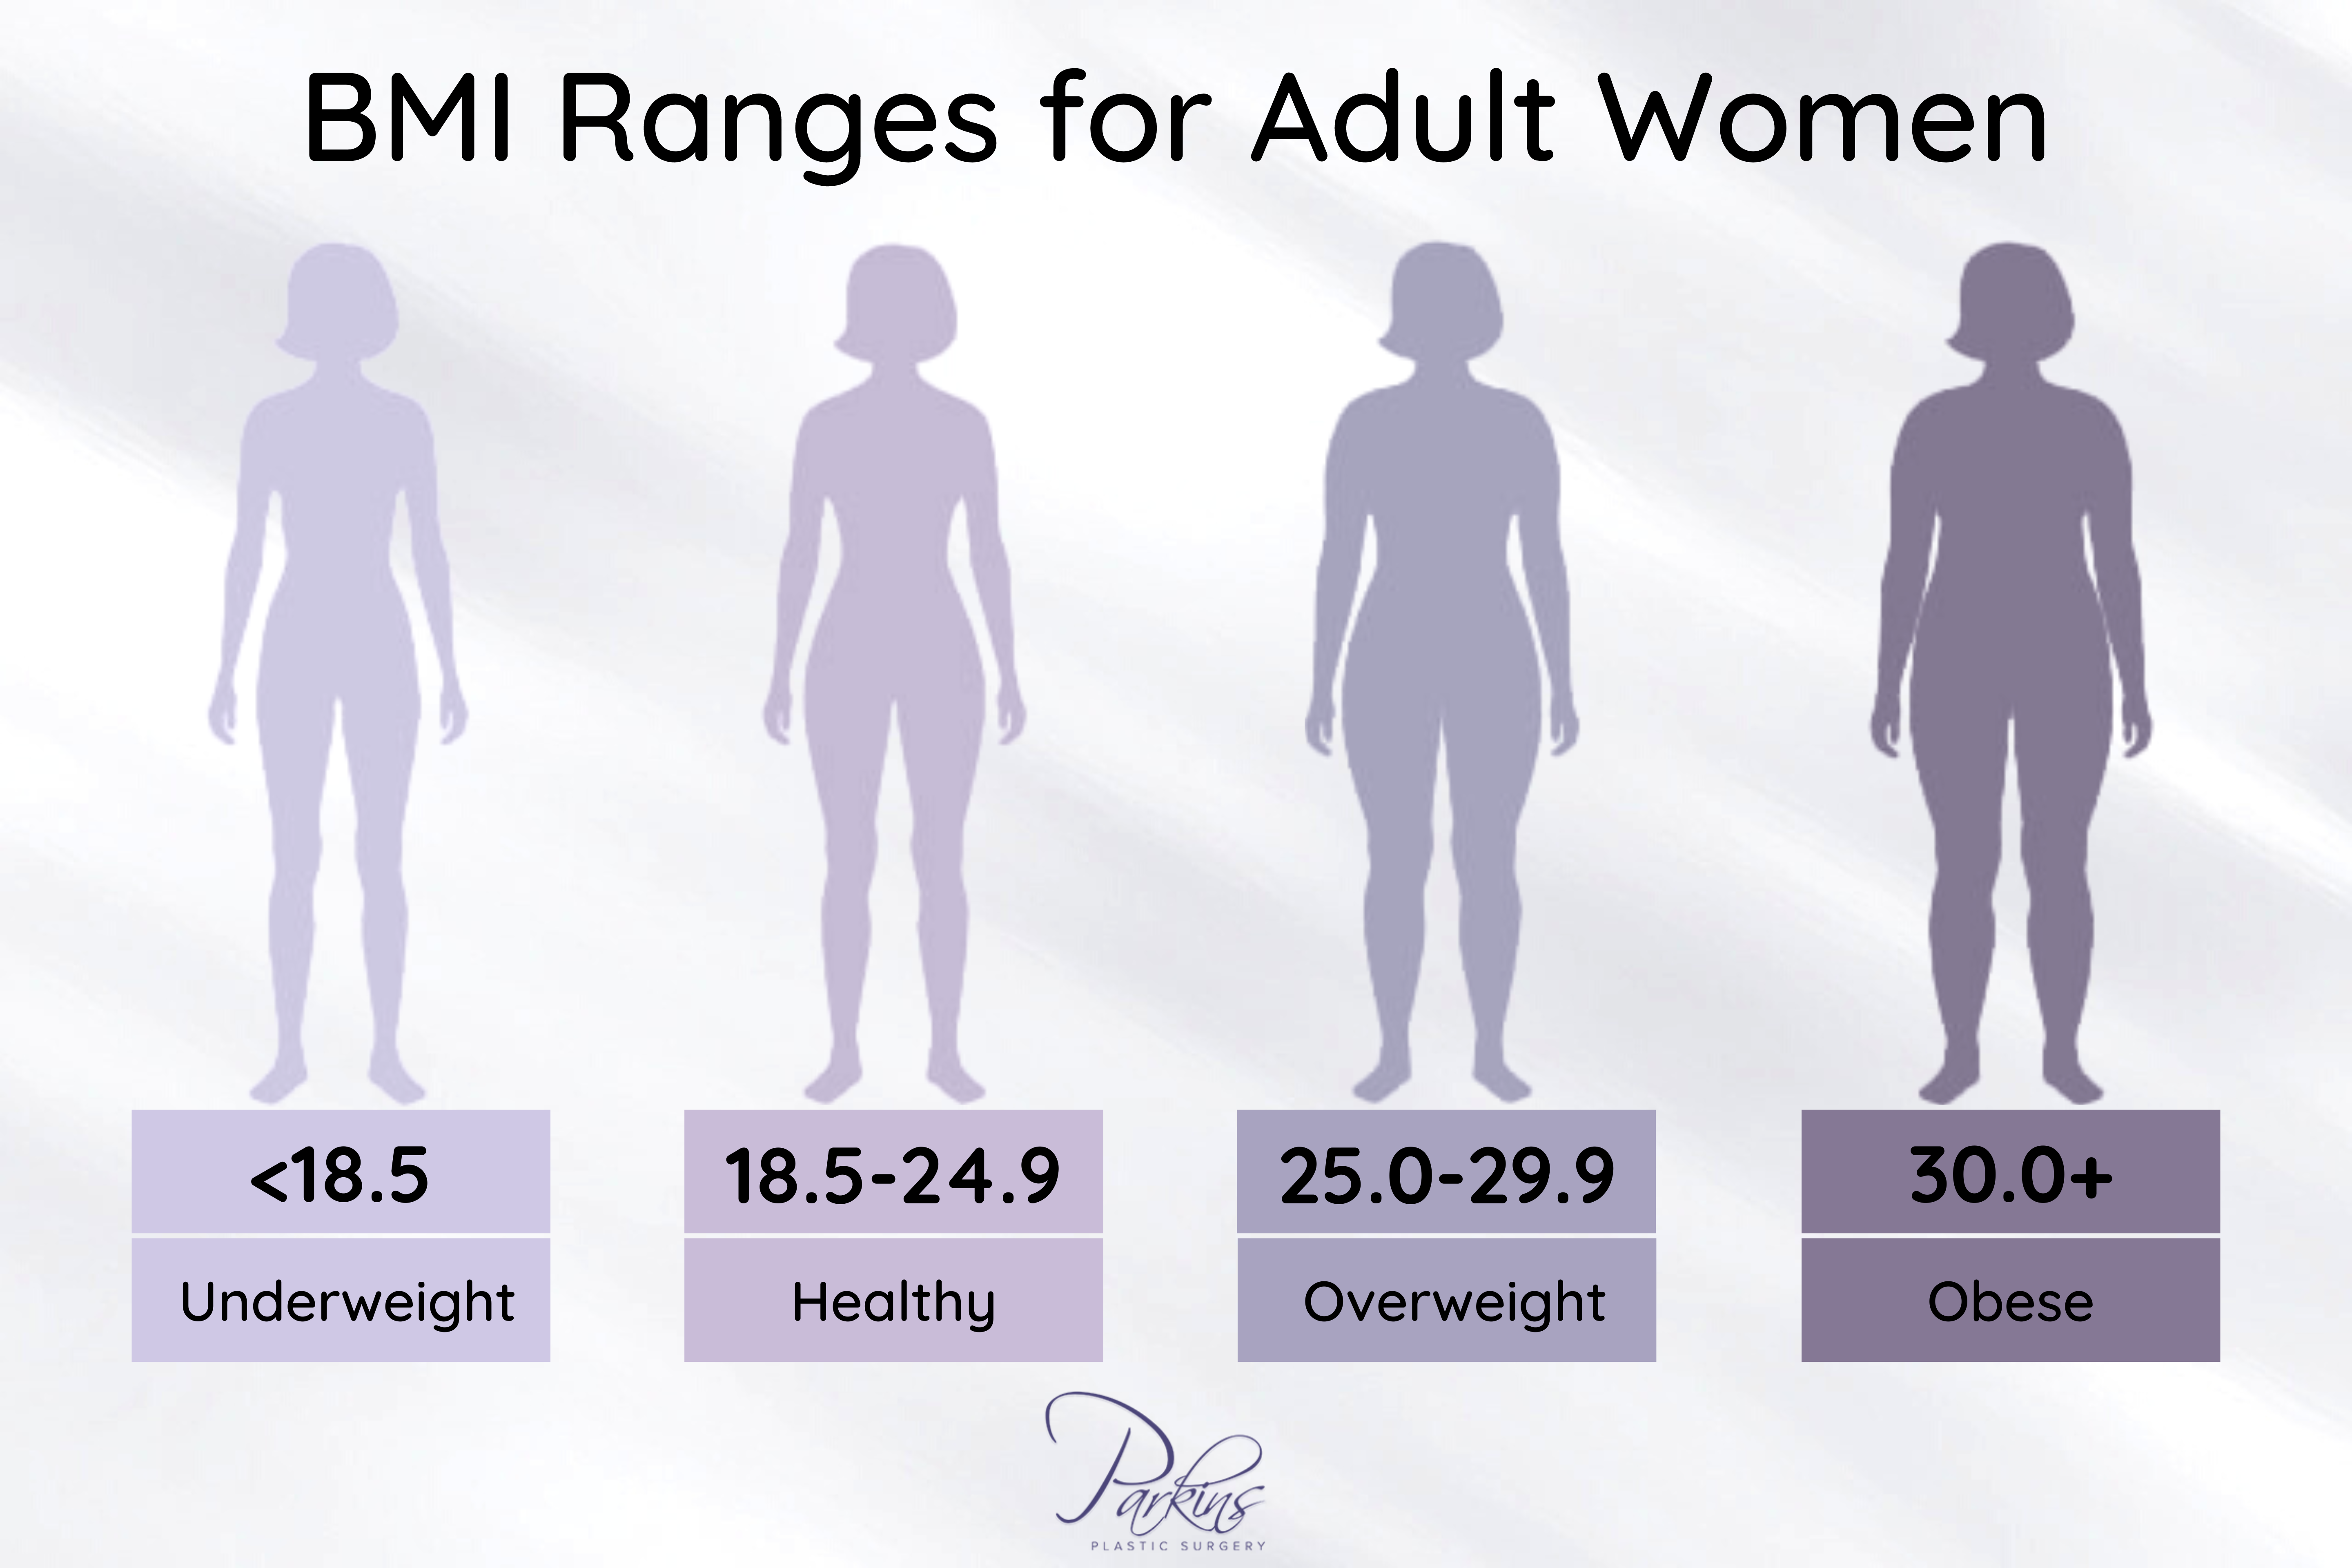 BMI Ranges for Adult Women